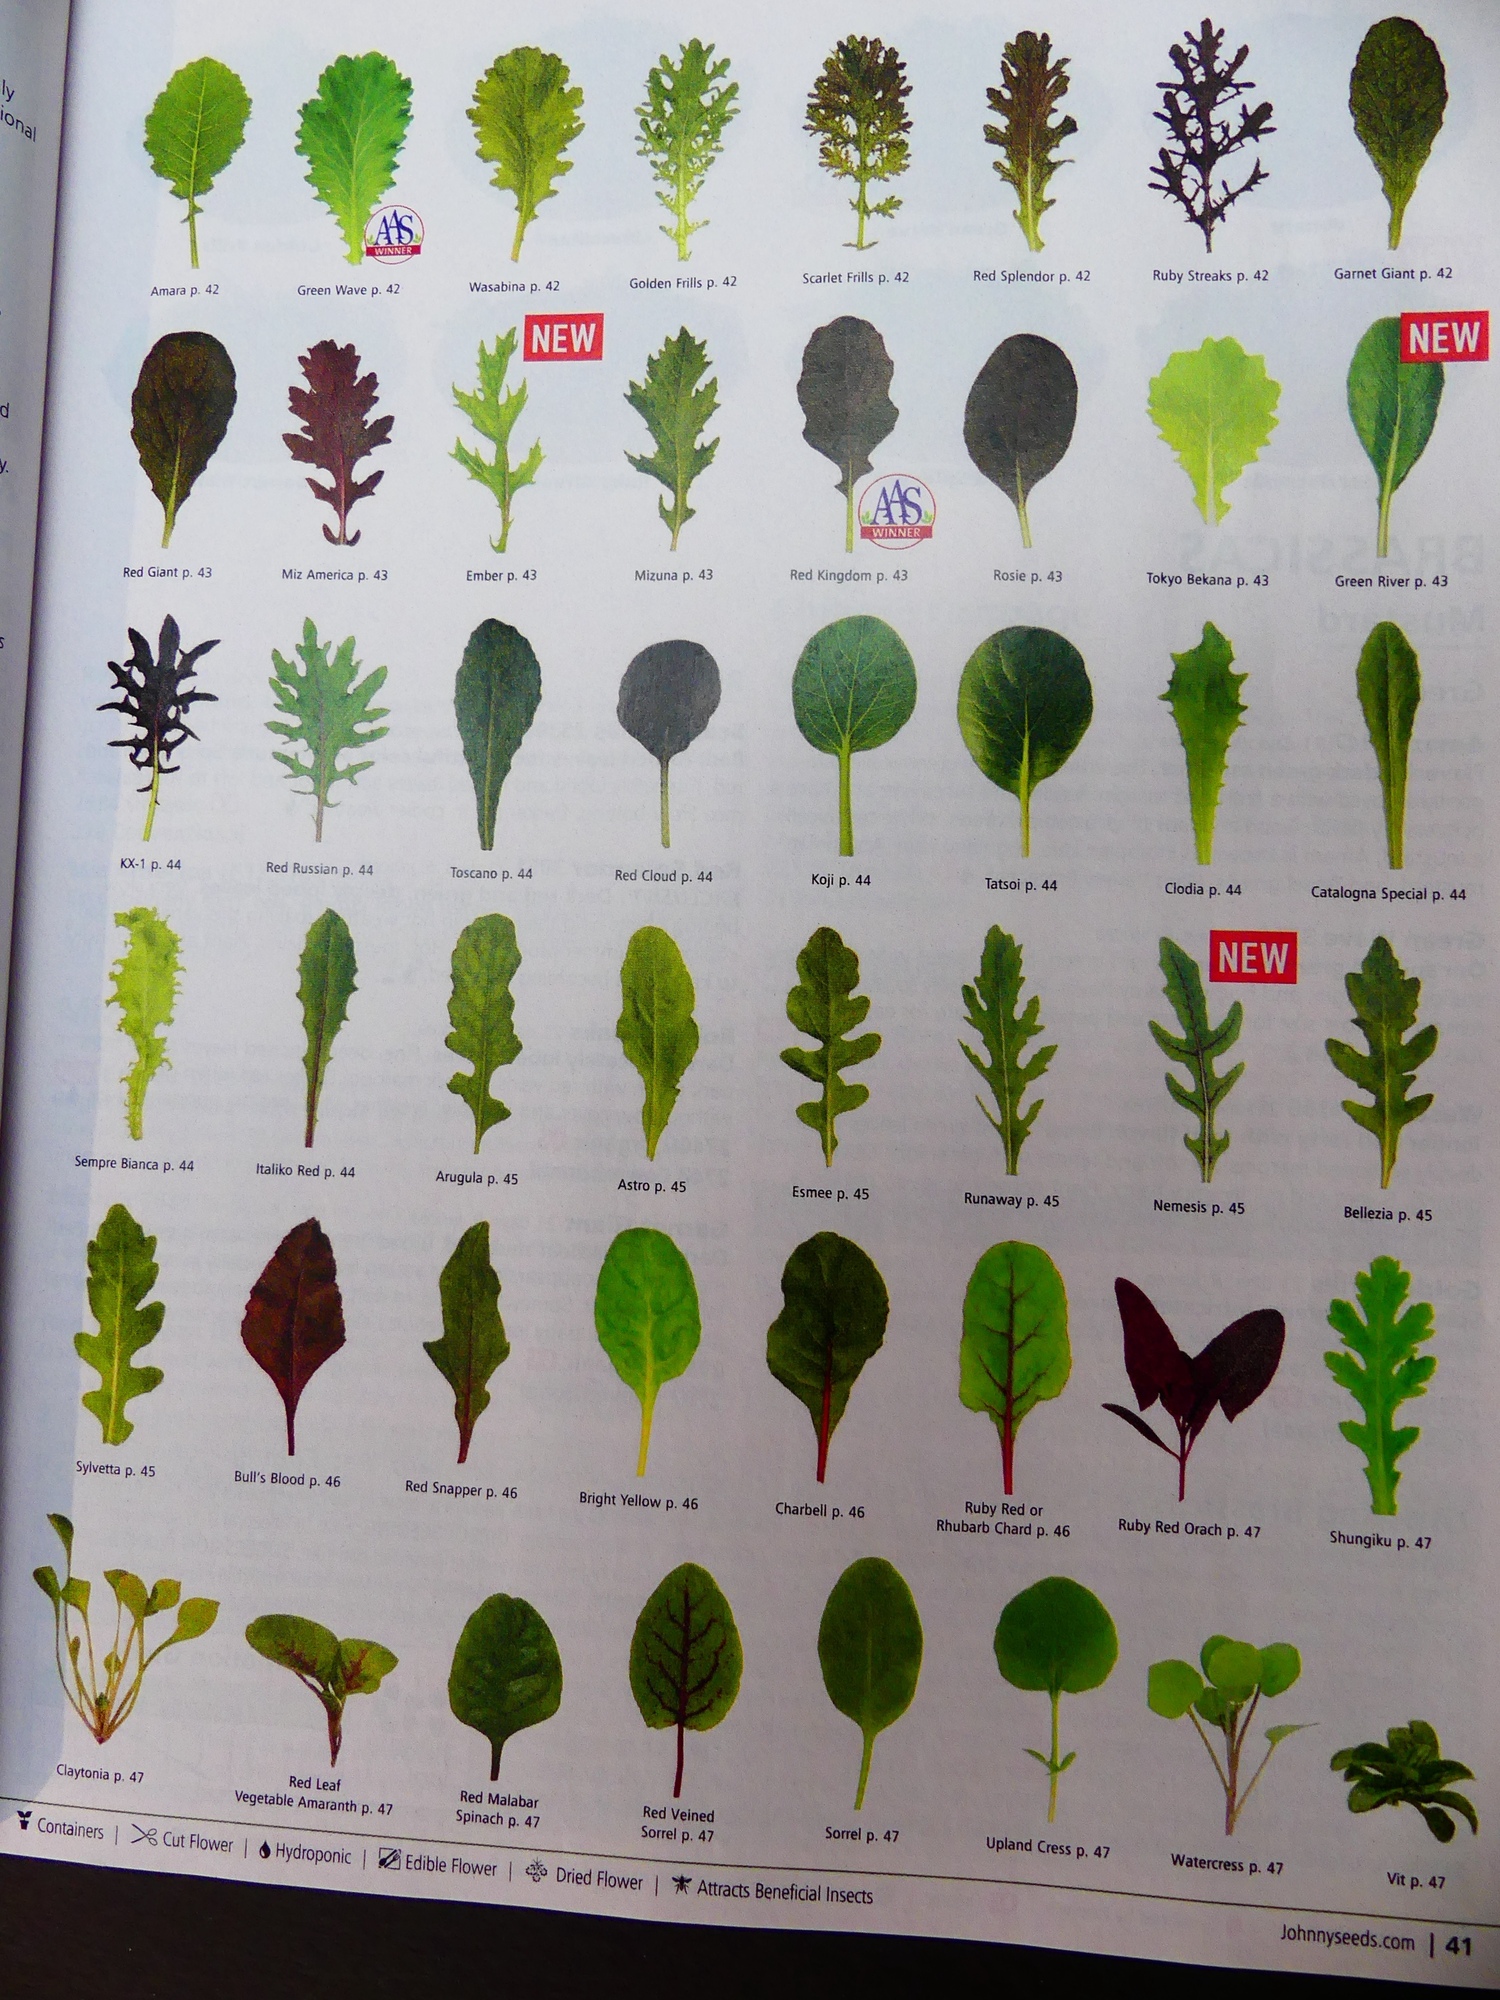 Johnny’s Select Seeds catalog is incredible for not just its number of vegetable seed offerings but also its charts, diagrams and detailed instructions. This page shows the color, texture and comparative size of baby leaf greens that are available individually or in mixes. Many are cut-and-come-again types.